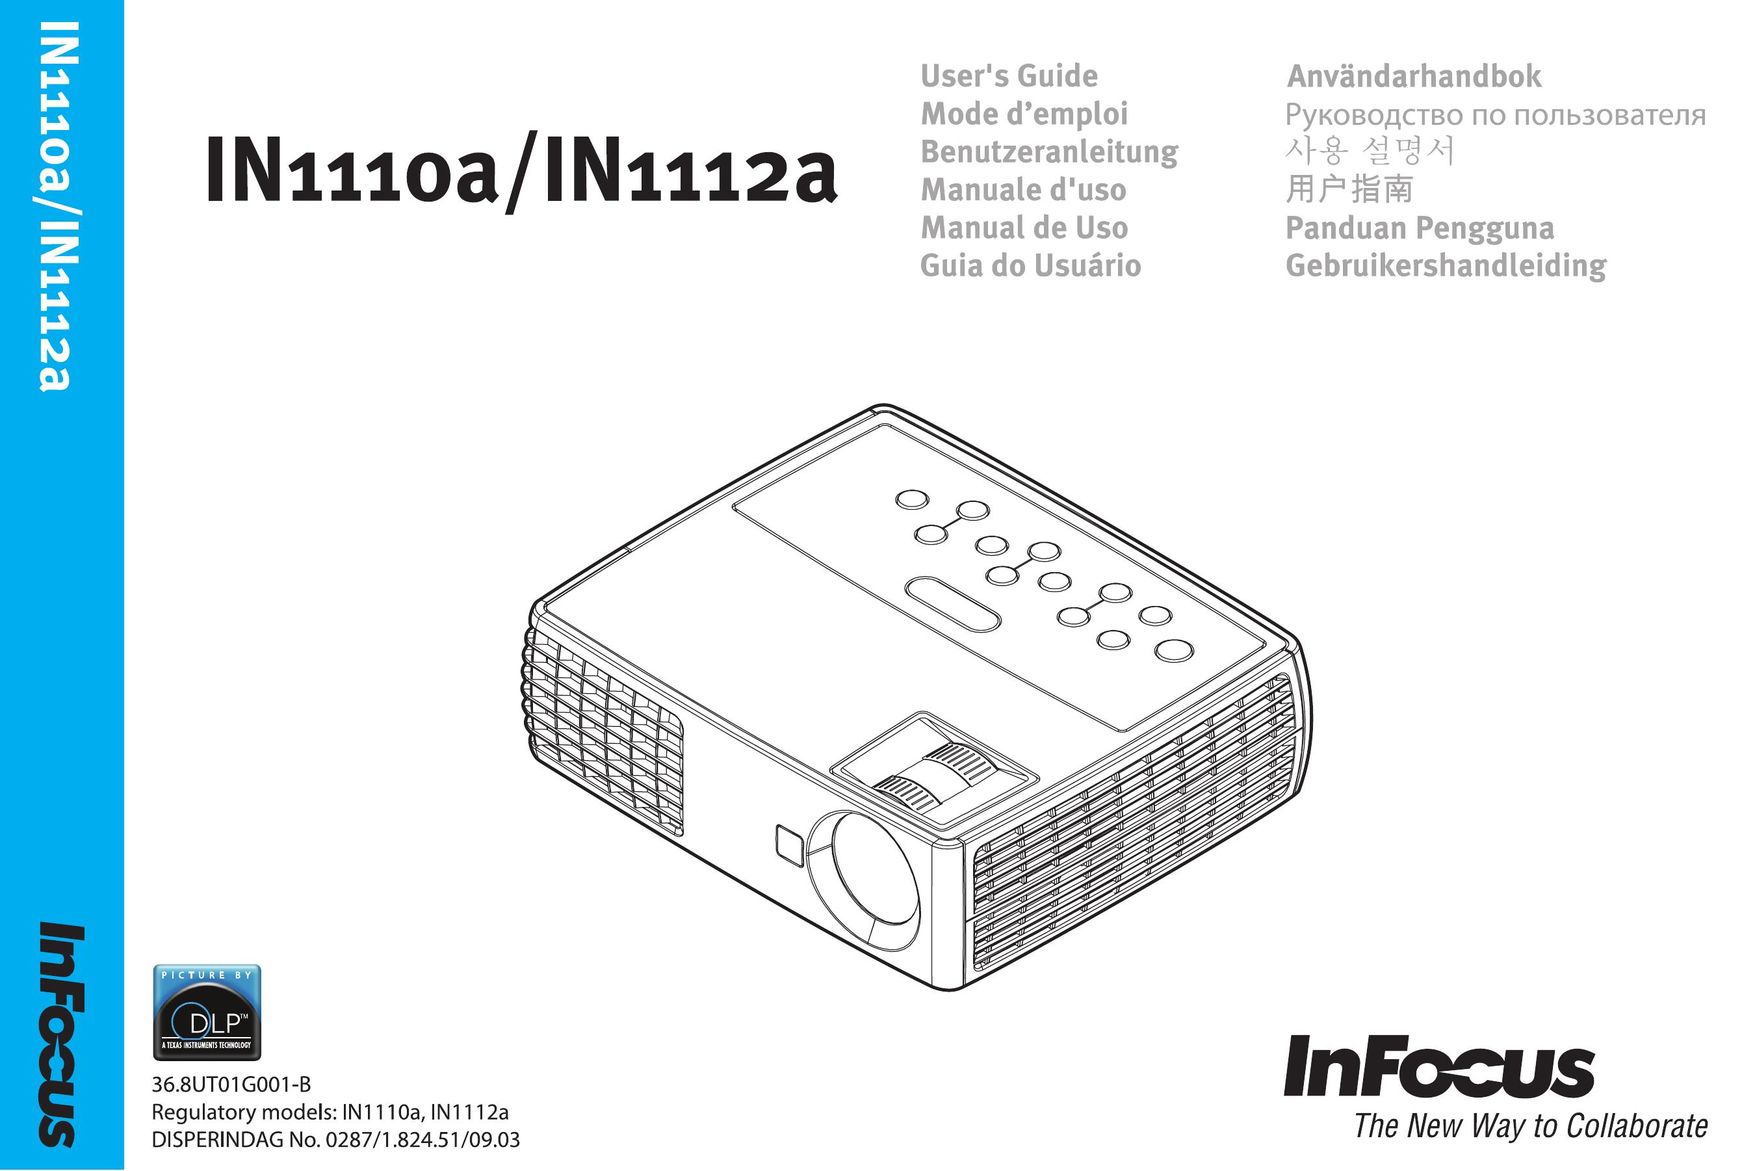 InFocus IN1112a Projection Television User Manual